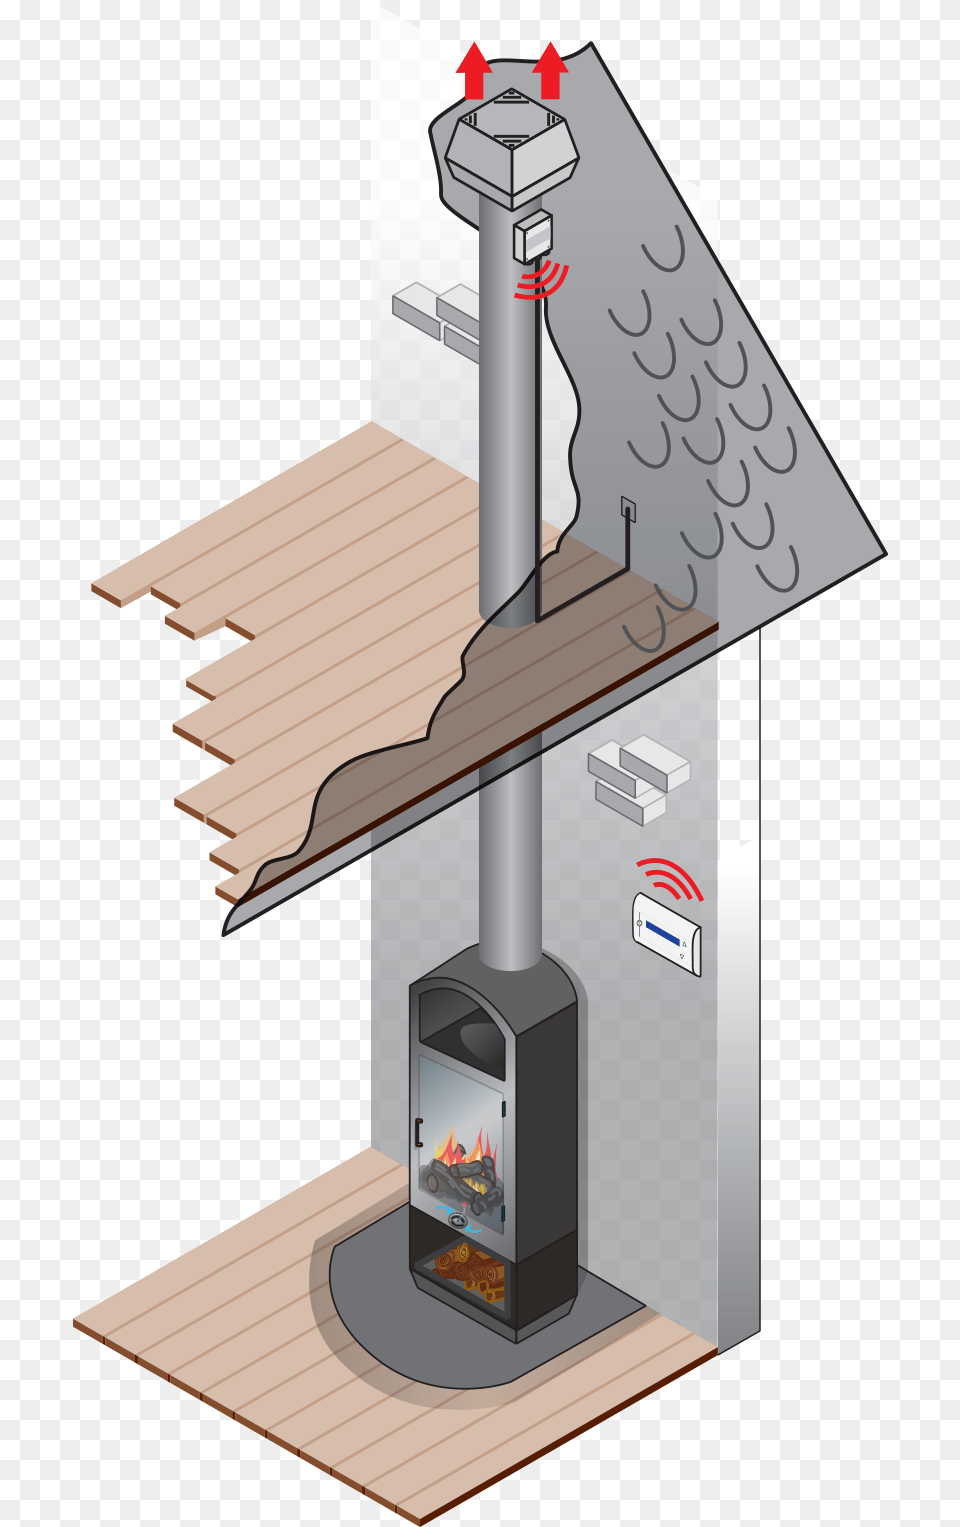 Chimney Fan For Solid Fuel Rcuprer Chaleur Conduit Chemine, Bus Stop, Outdoors, Cross, Symbol Png